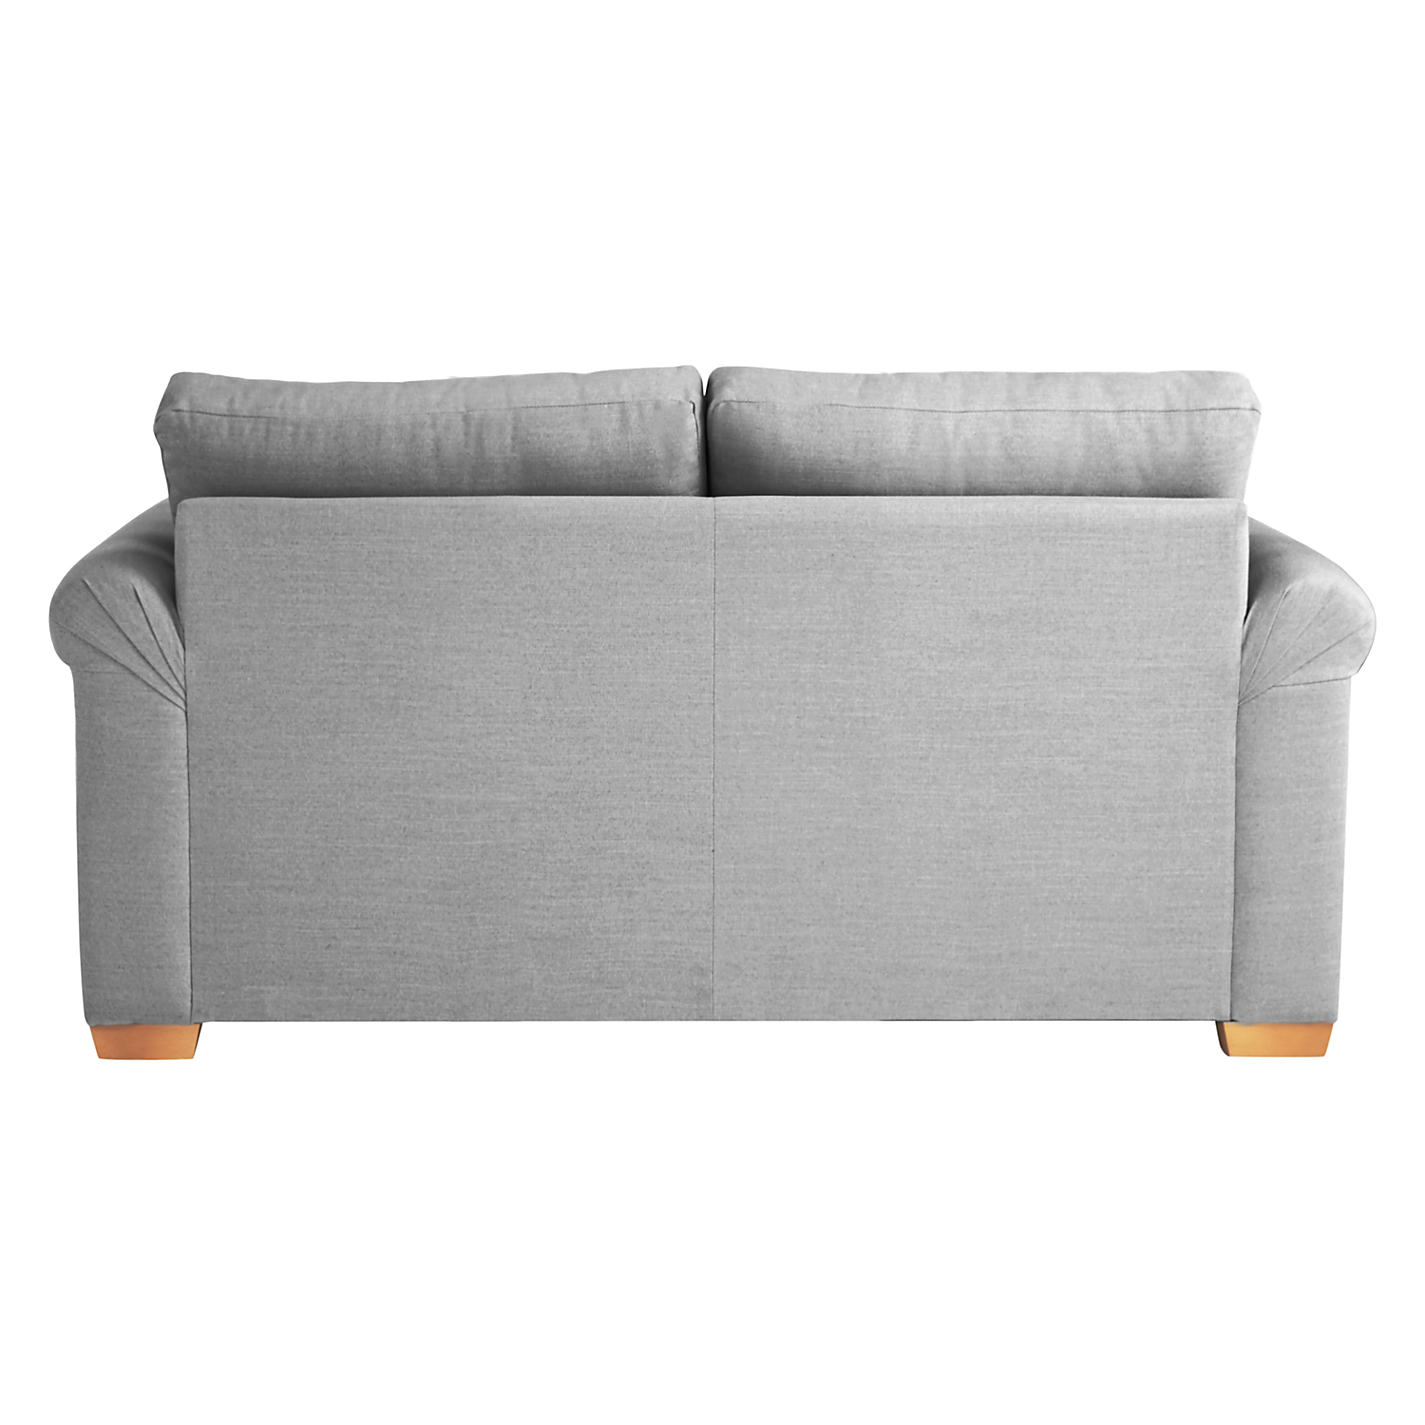 ... buy john lewis malone 2 seater small sofa bed with pocket sprung CMEIKVP